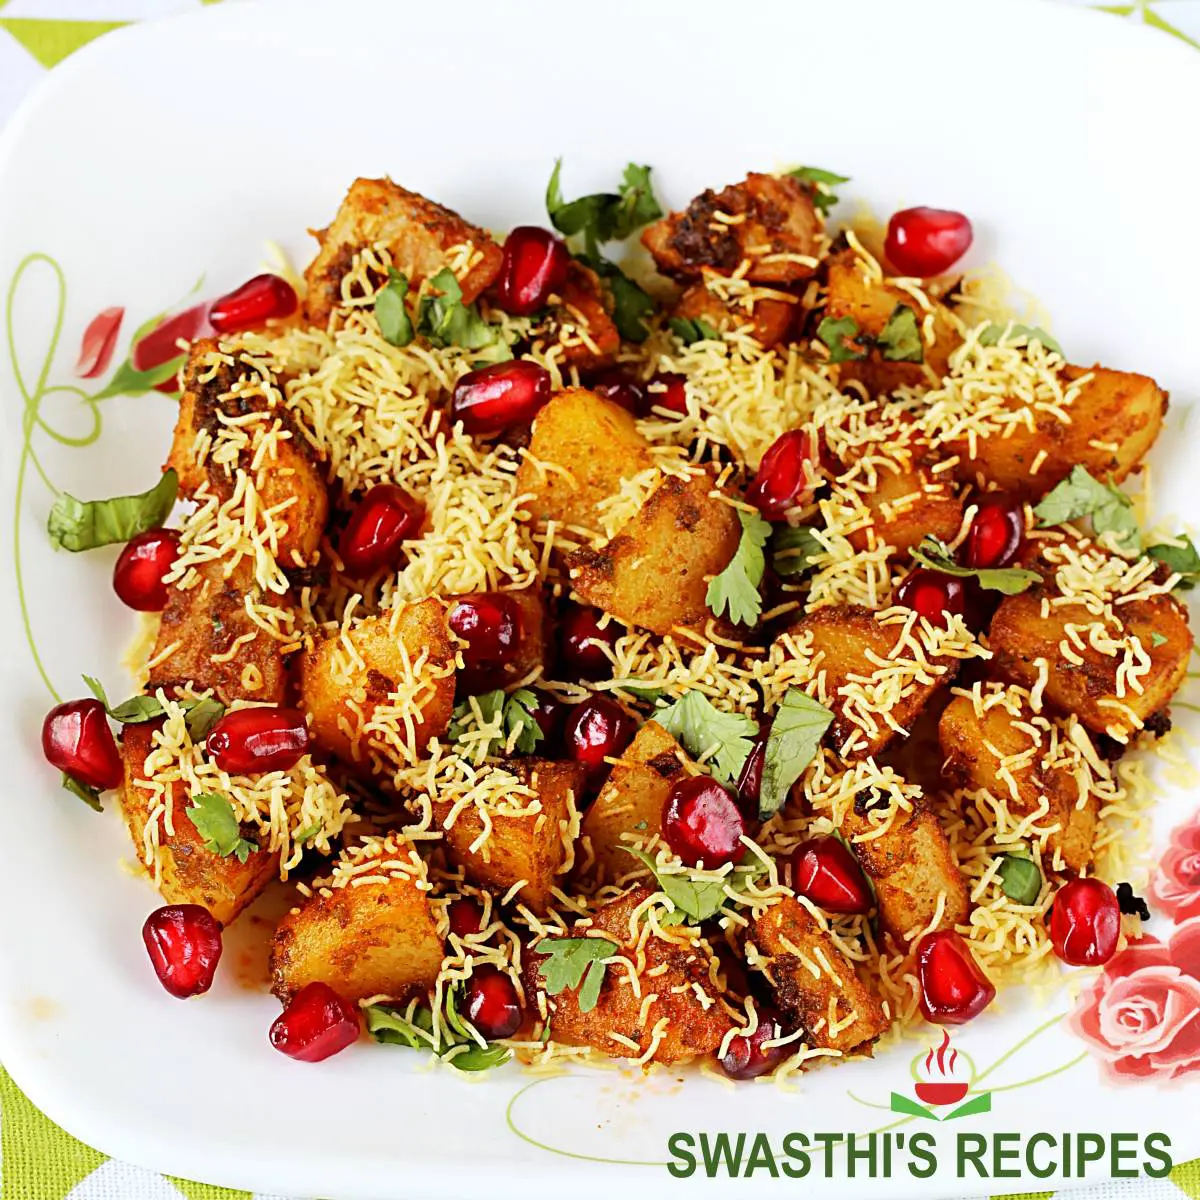 aloo chaat made with pan fried potatoes, ground spices and sev